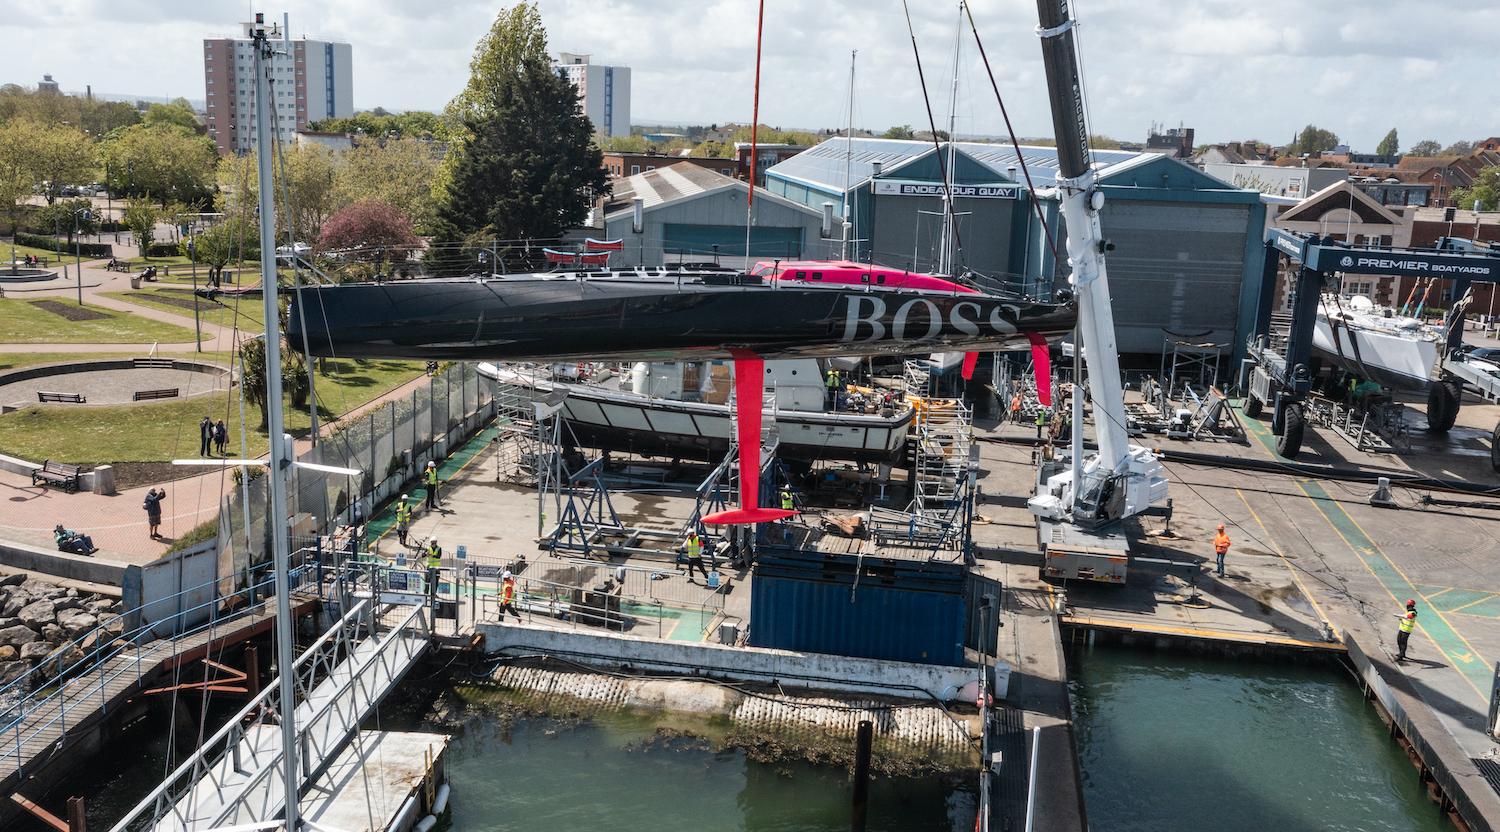 Bluefin completes work on Hugo Boss as Alex Thomson prepares for the Fastnet race in August